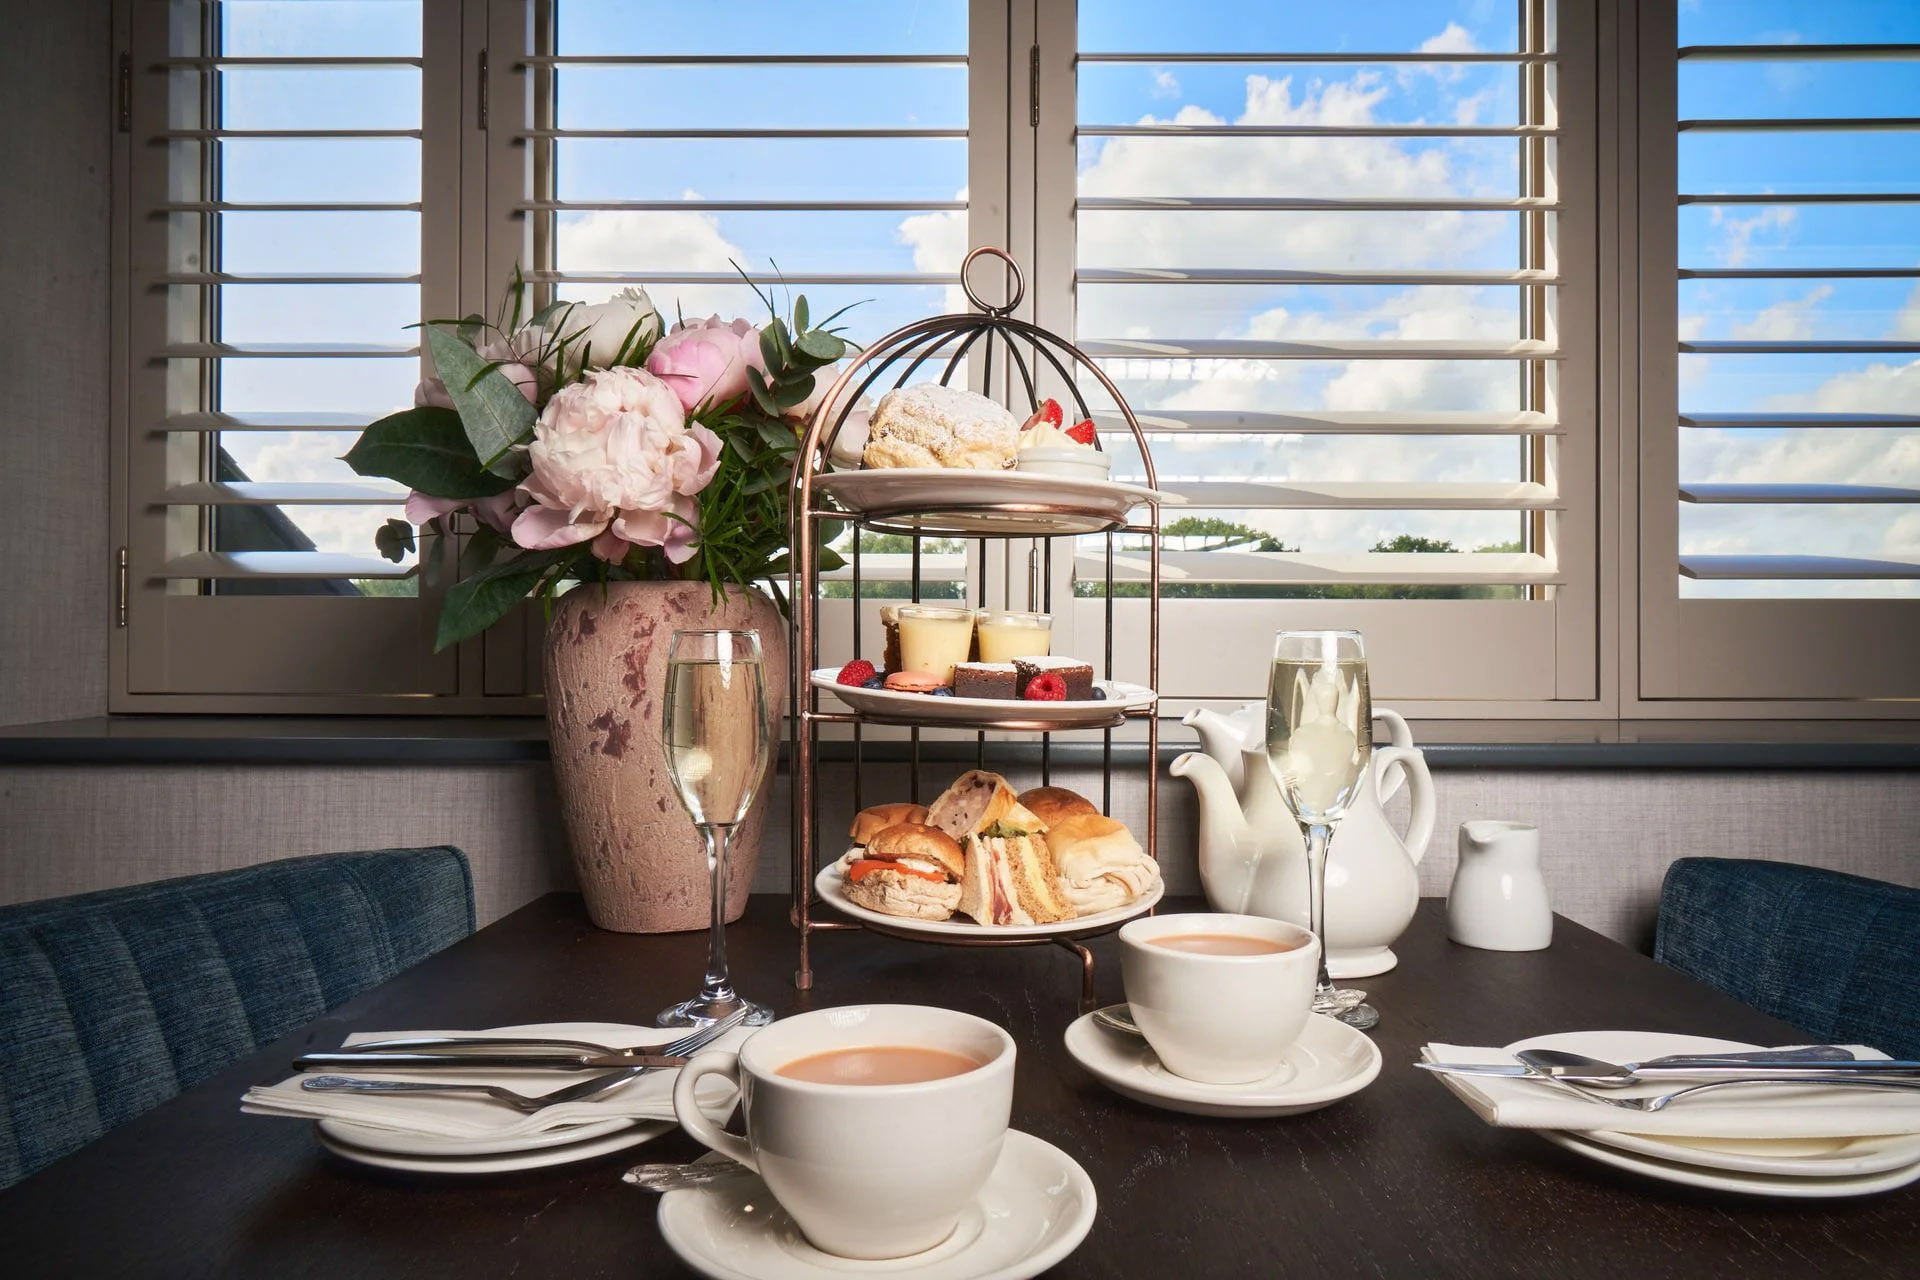 The Best afternoon teas in Lancashire The Wrightington Hotel & Spa